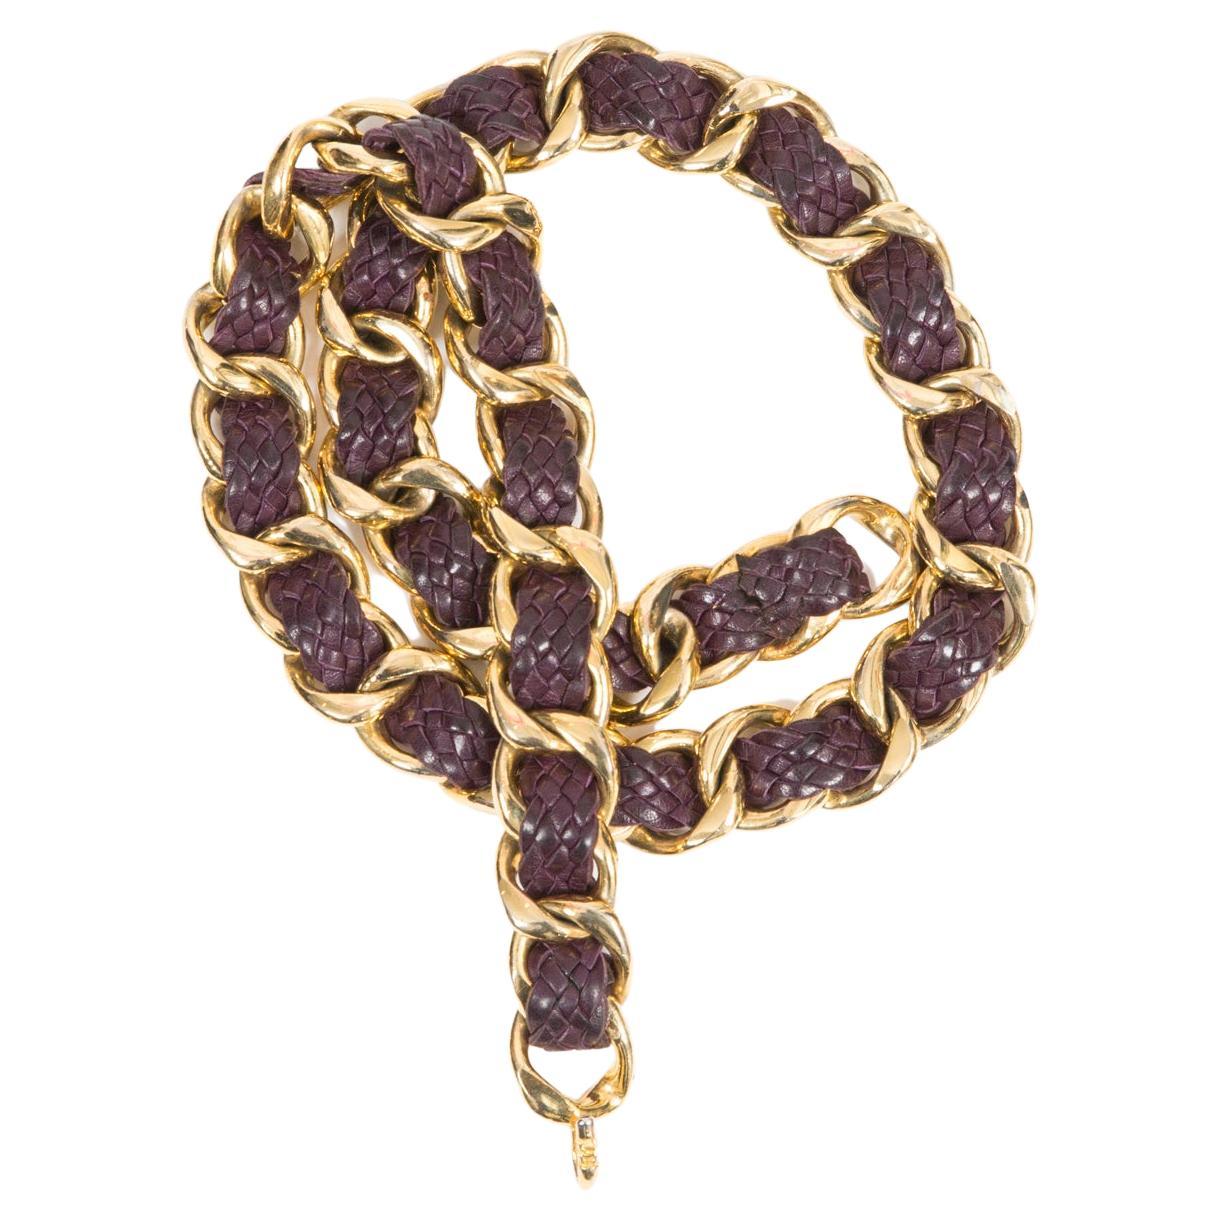 Chanel Gold Tone and Plum Leather Chain Belt 